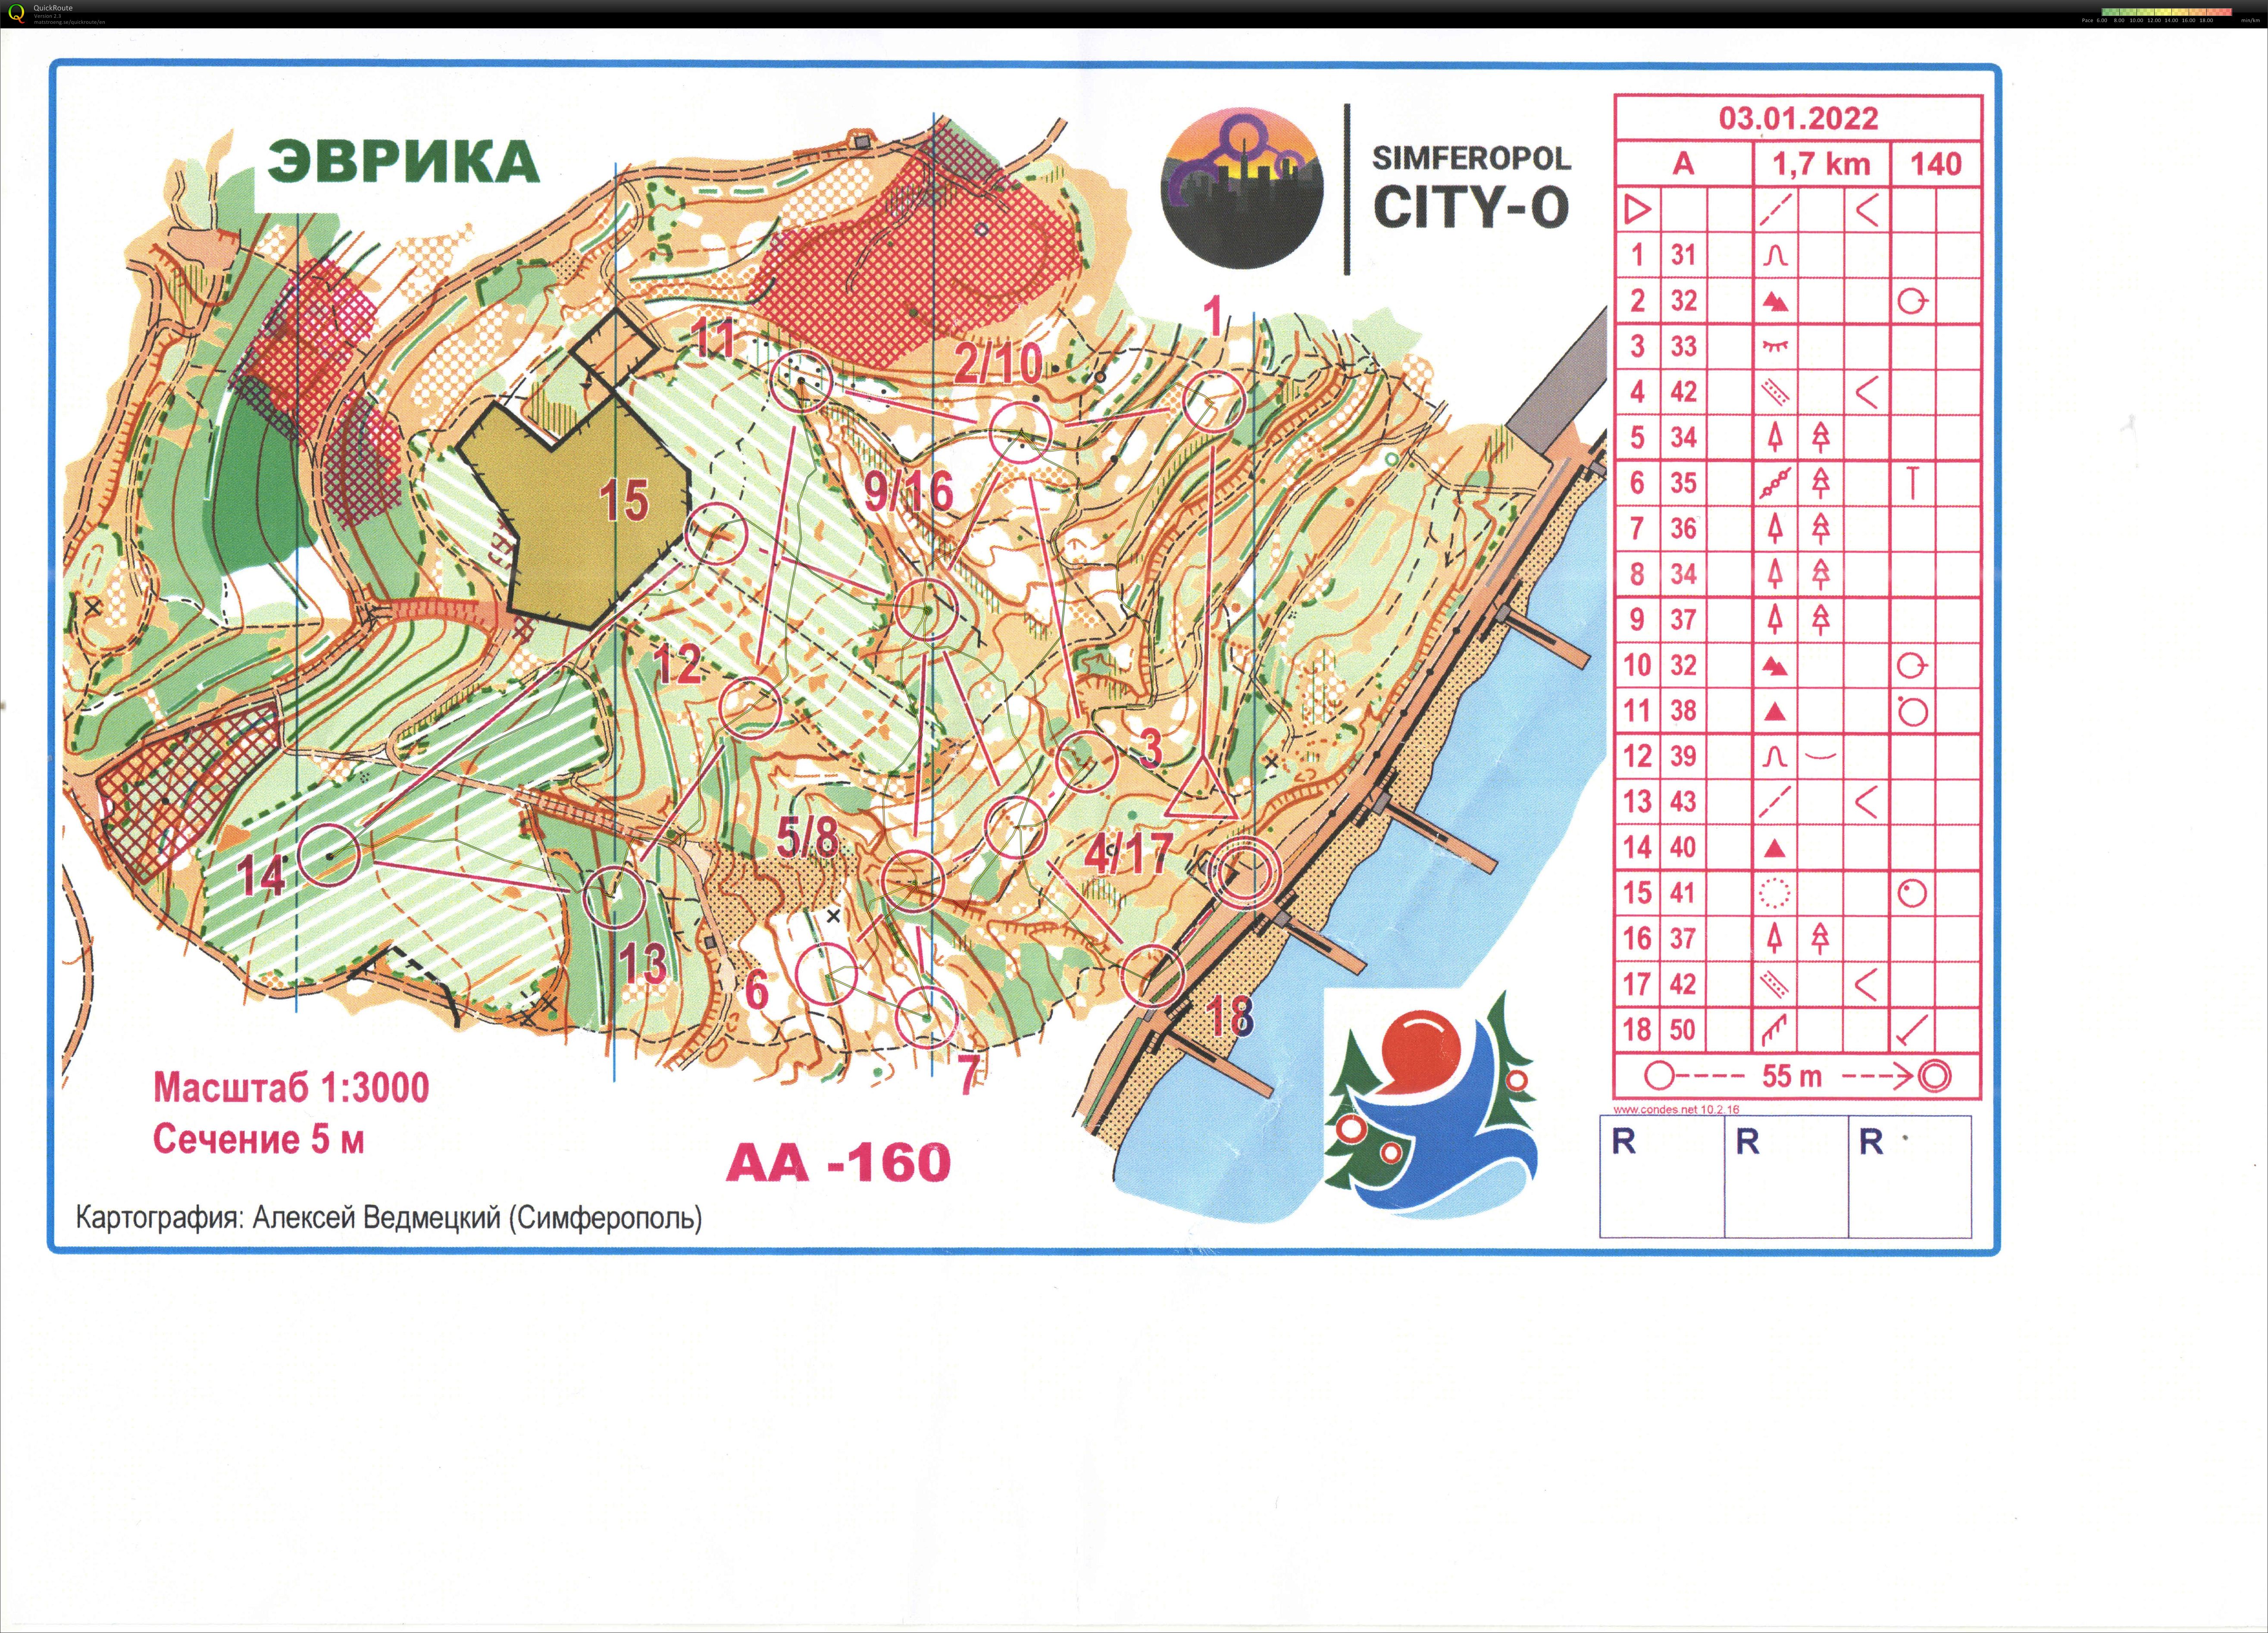 Map with track - О-Рождество. 2 день, area - , from orienteering map archive of Artem Tsvetkov